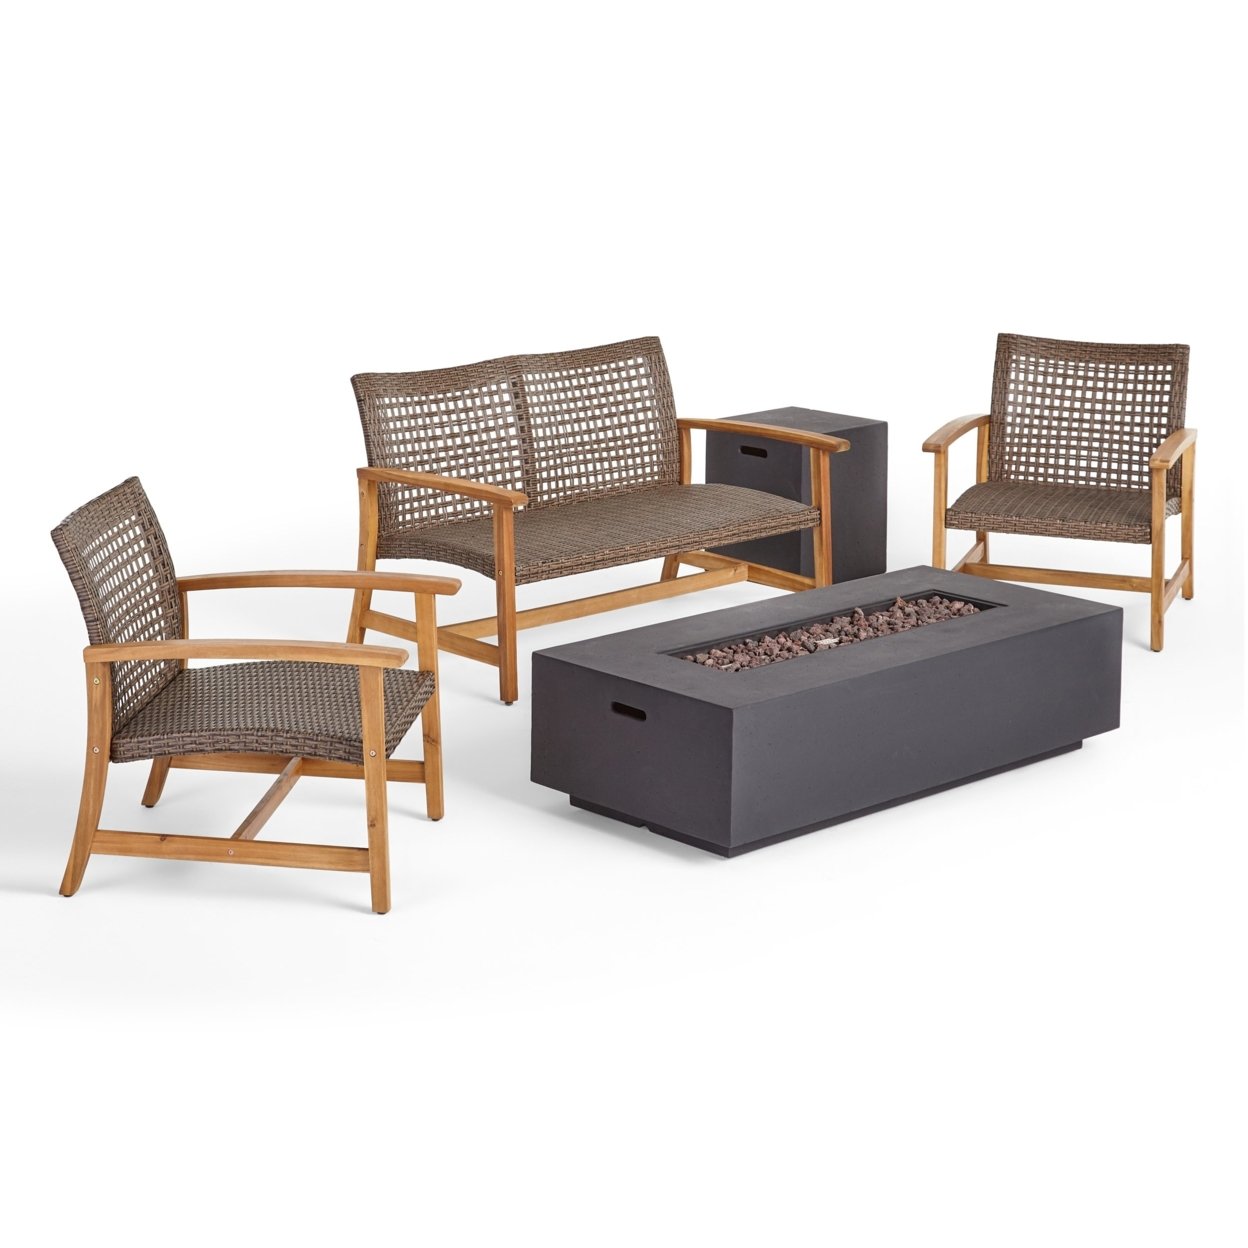 Allison Outdoor 5 Piece Wood And Wicker Chat Set With Fire Pit - Mixed Mocha, Natural Finish, Dark Gray